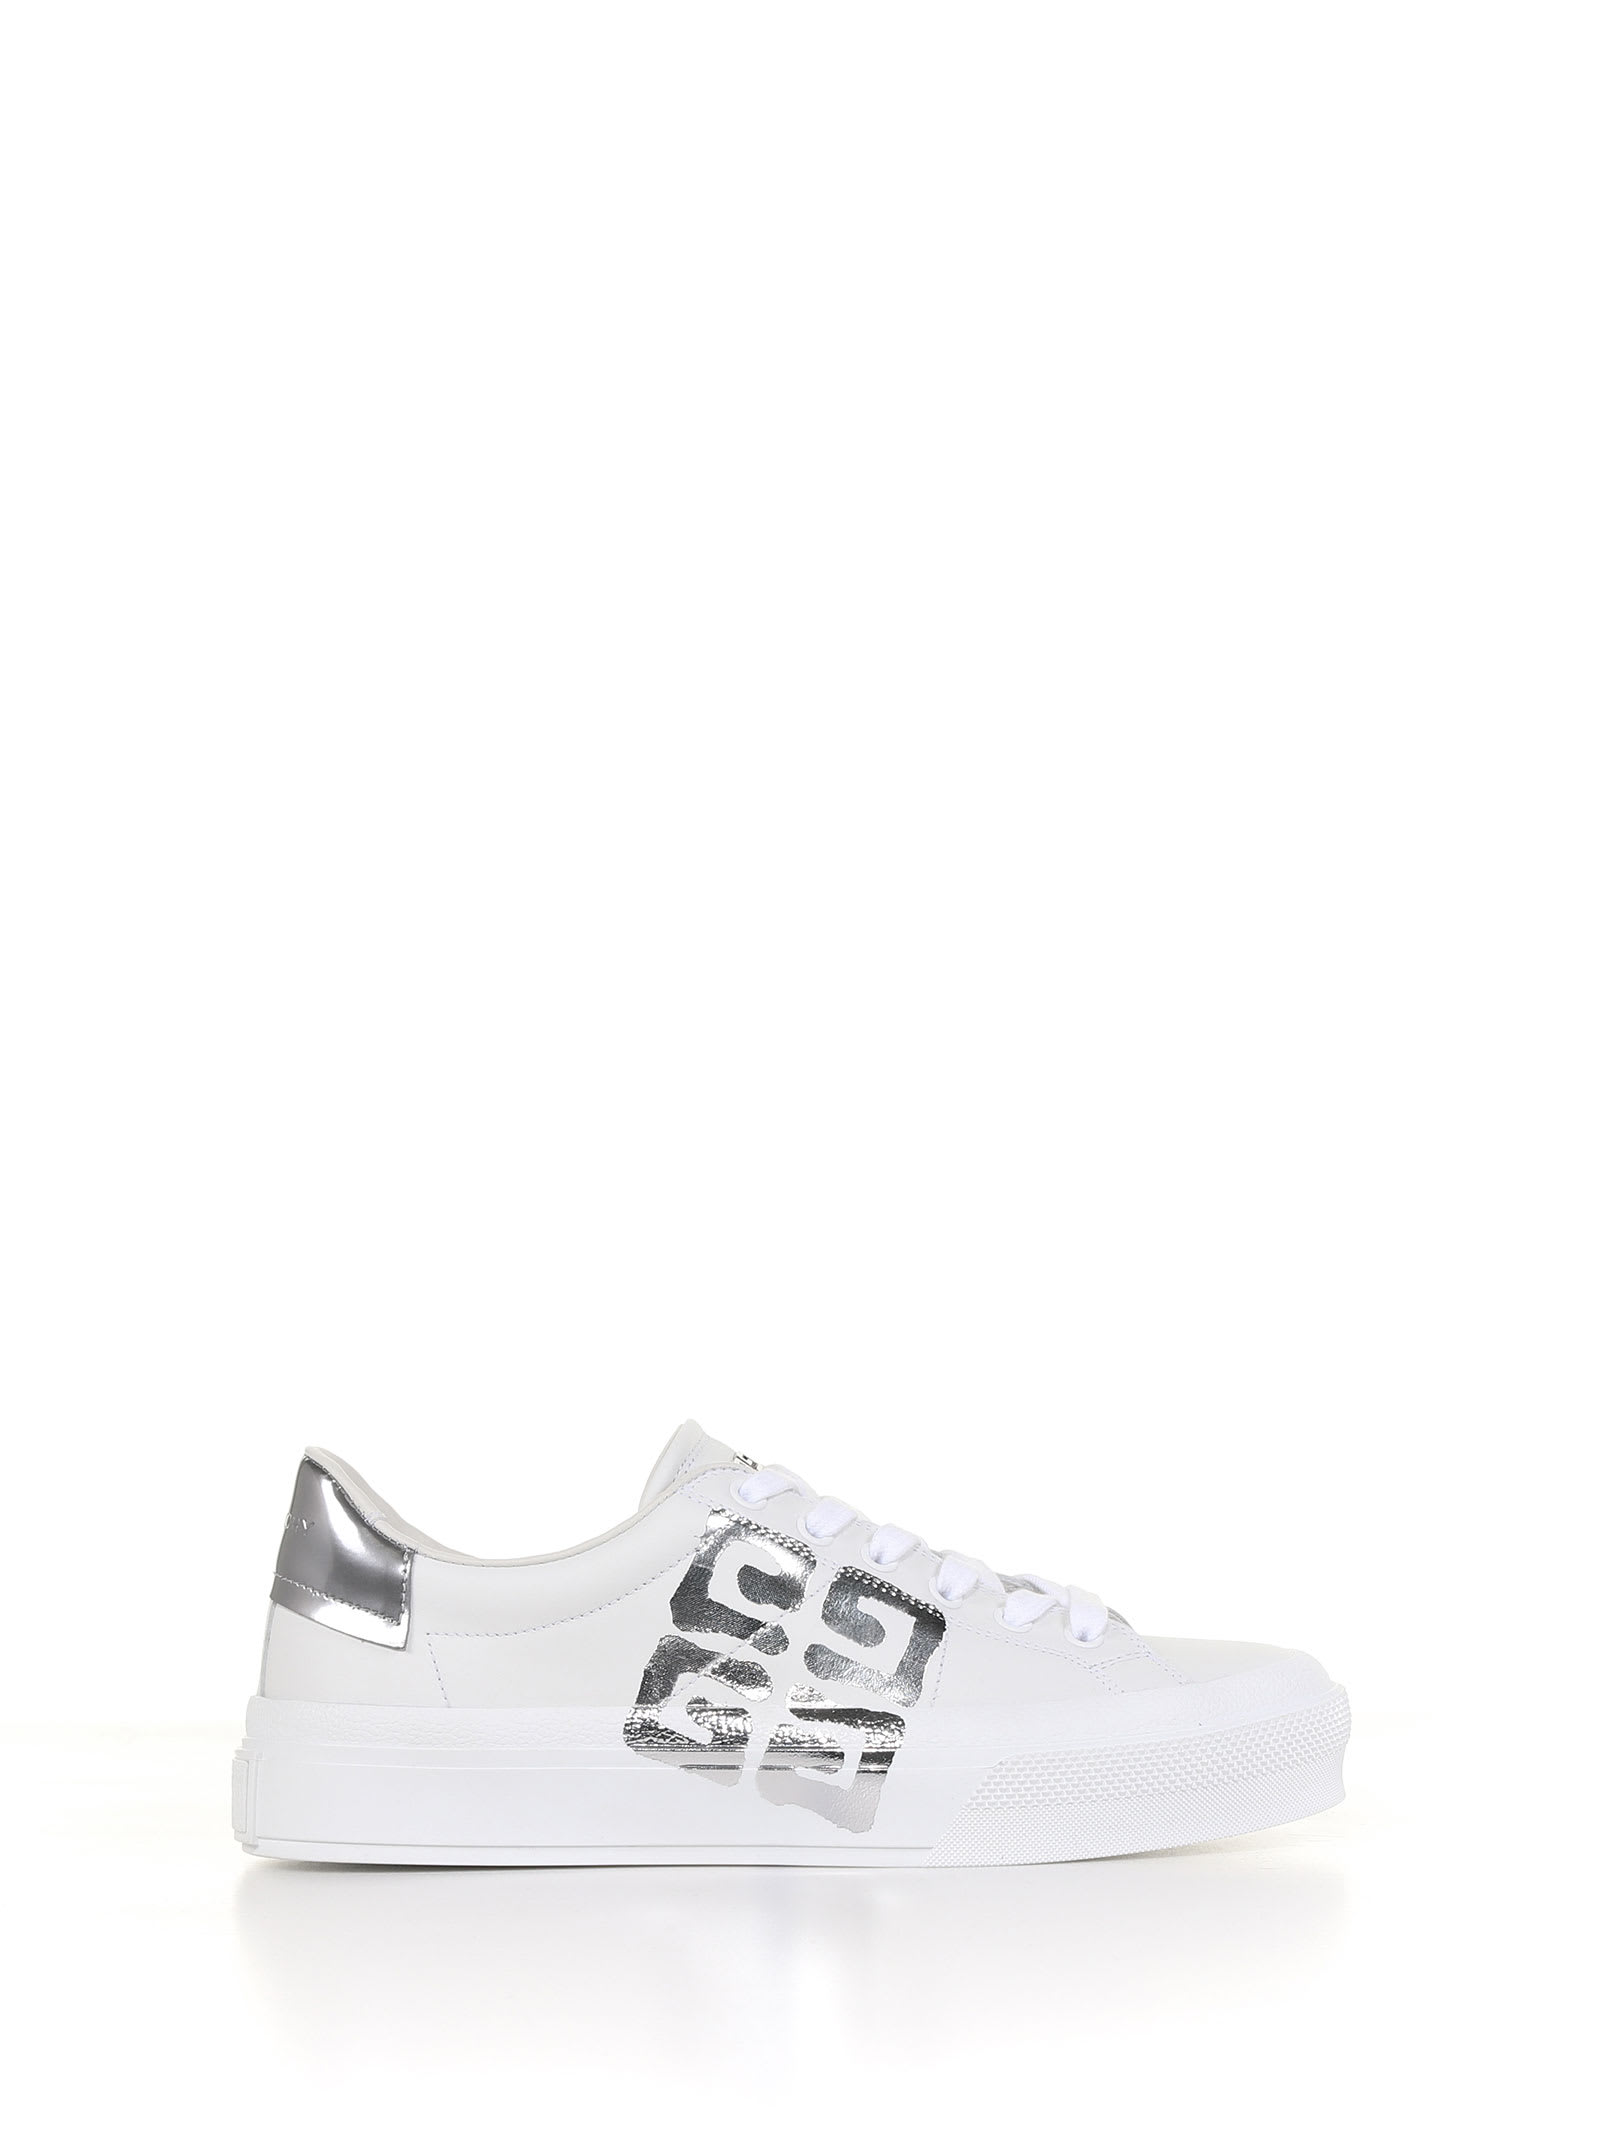 Givenchy City Sneaker In Leather